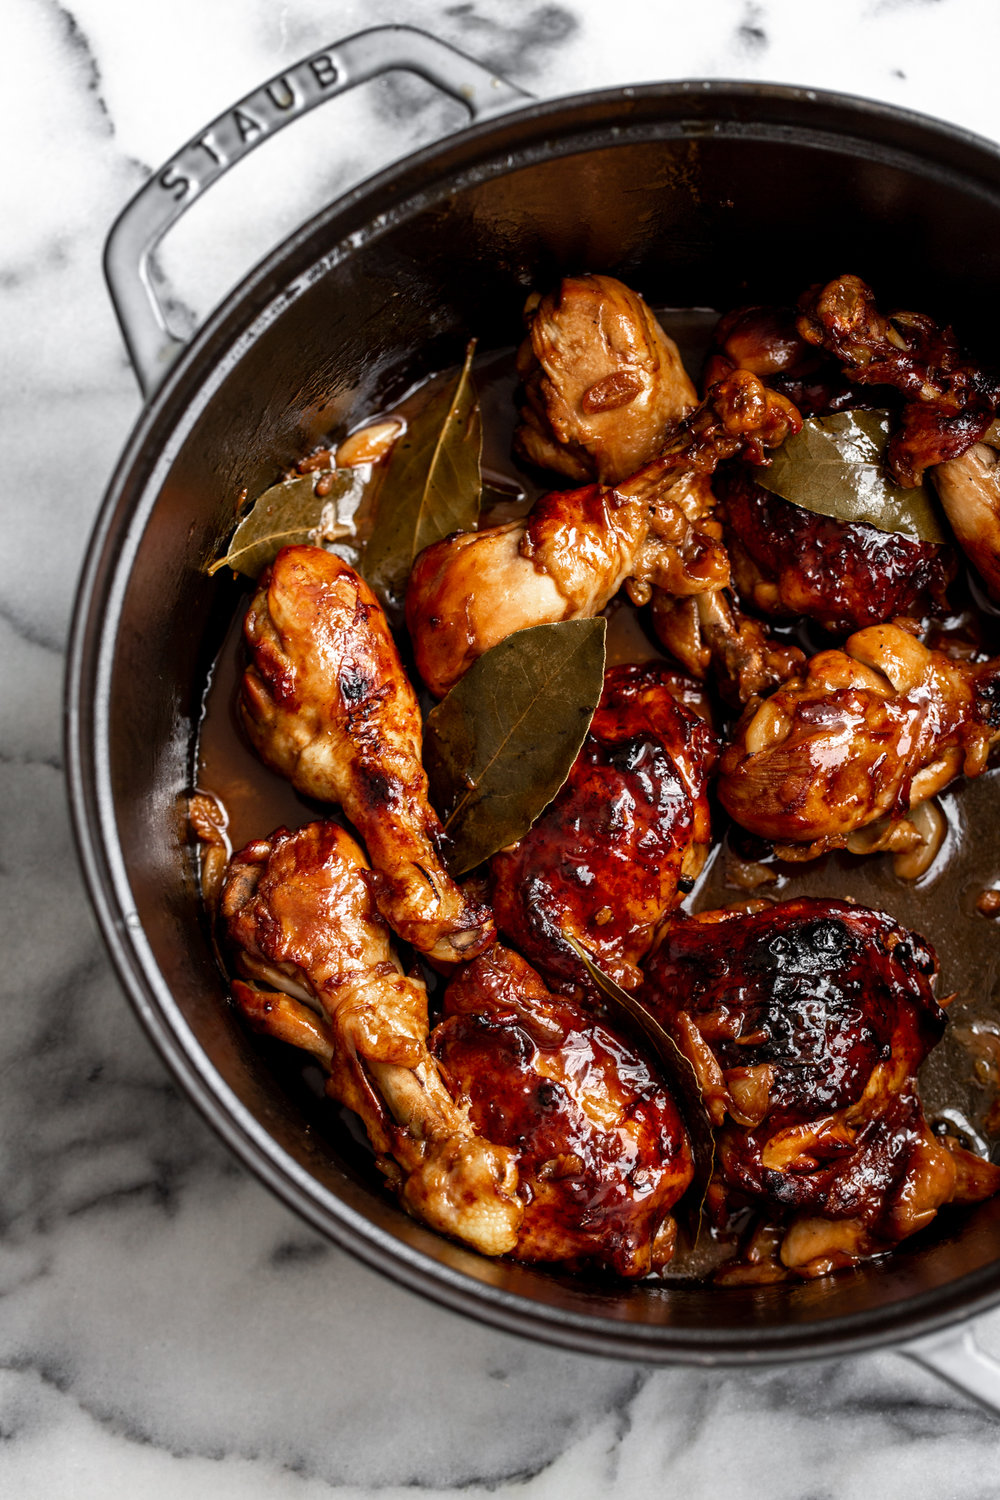 Filipino chicken adobo Chicken legs and thighs are cooked in a tangy sauce made from soy sauce vinegar and garlic in this classic recipe.